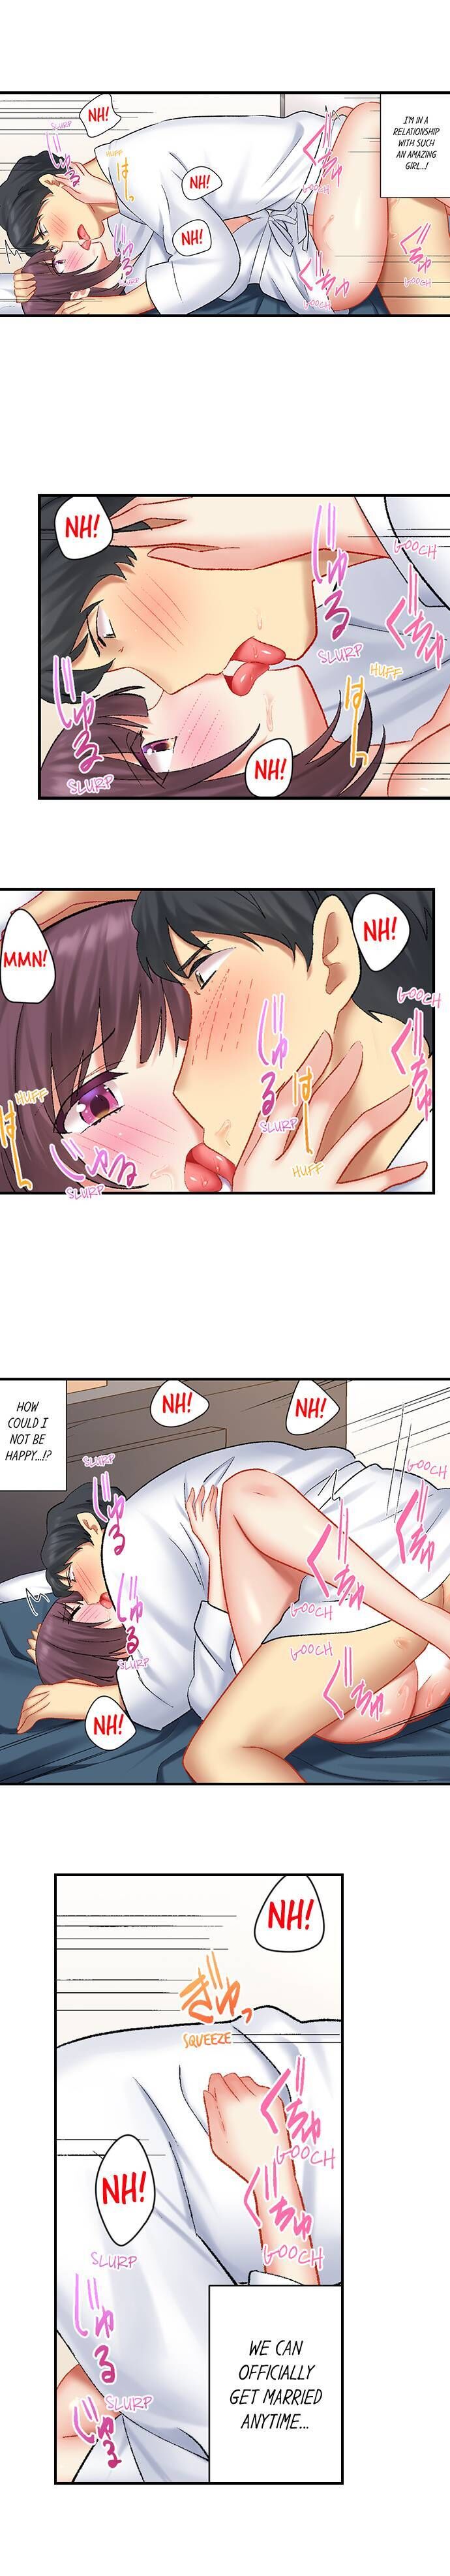 Our Kinky Newlywed Life Chapter 30 - Page 4